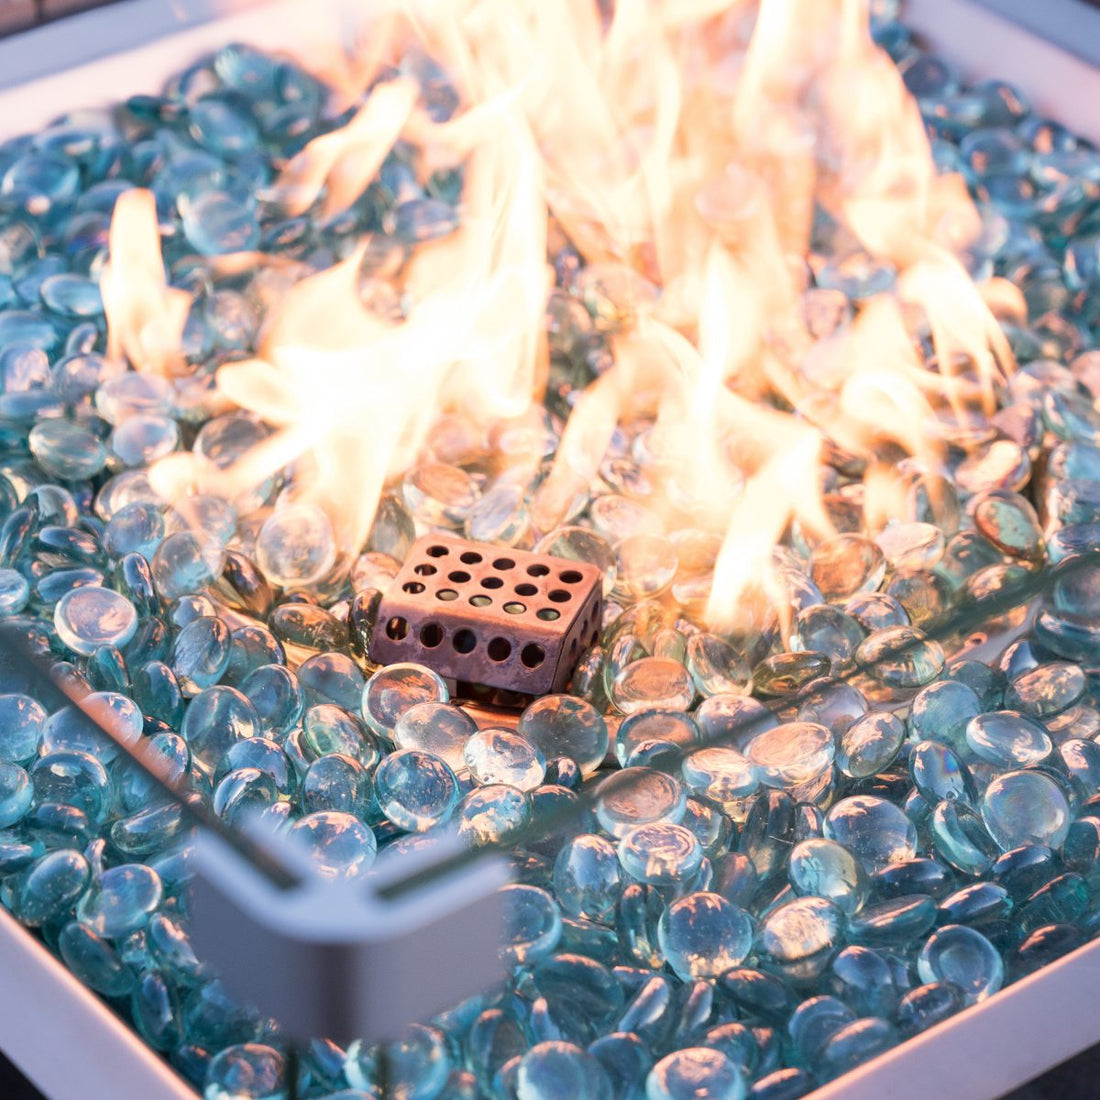 Outdoor Fire Pit Buying Guide: Things You Should Know